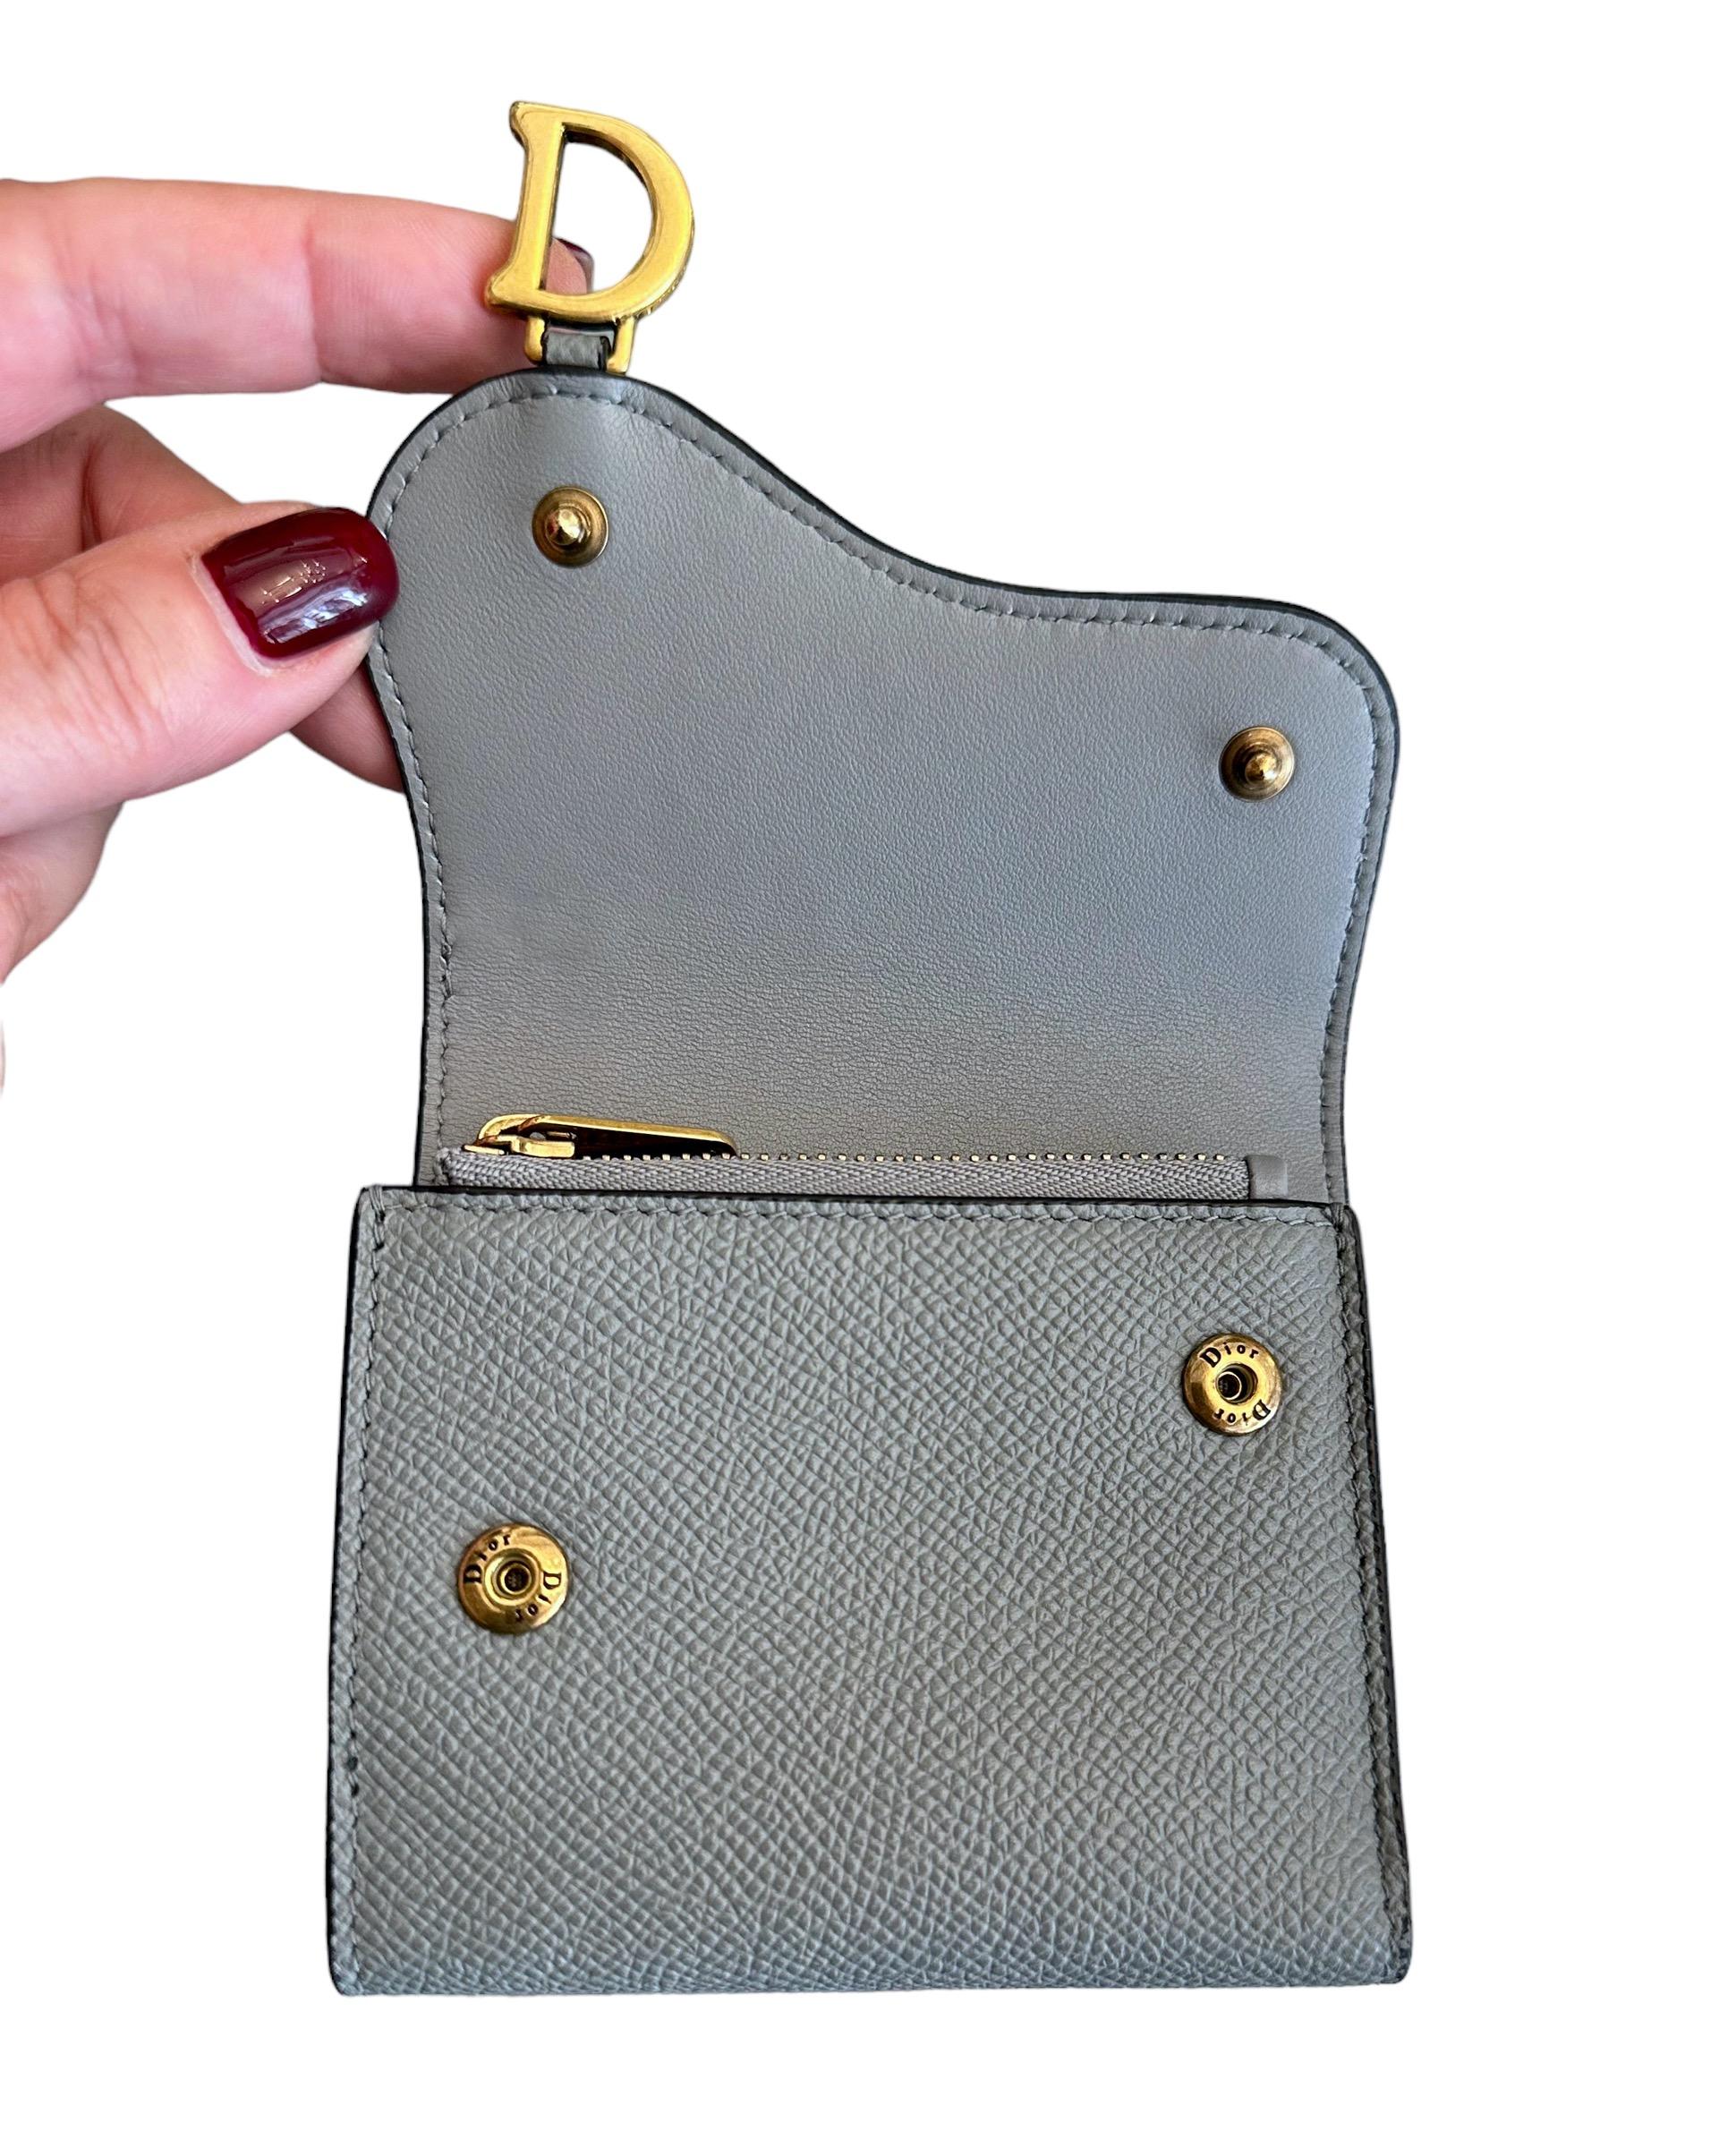 This pre-owned  Saddle Lotus wallet is part of the Saddle Collection from the house of Dior.
It is crafted in a gray stone color grained calfskin leather and is in perfect condition.
It features the iconic asymmetrical flap and antique gold-finish